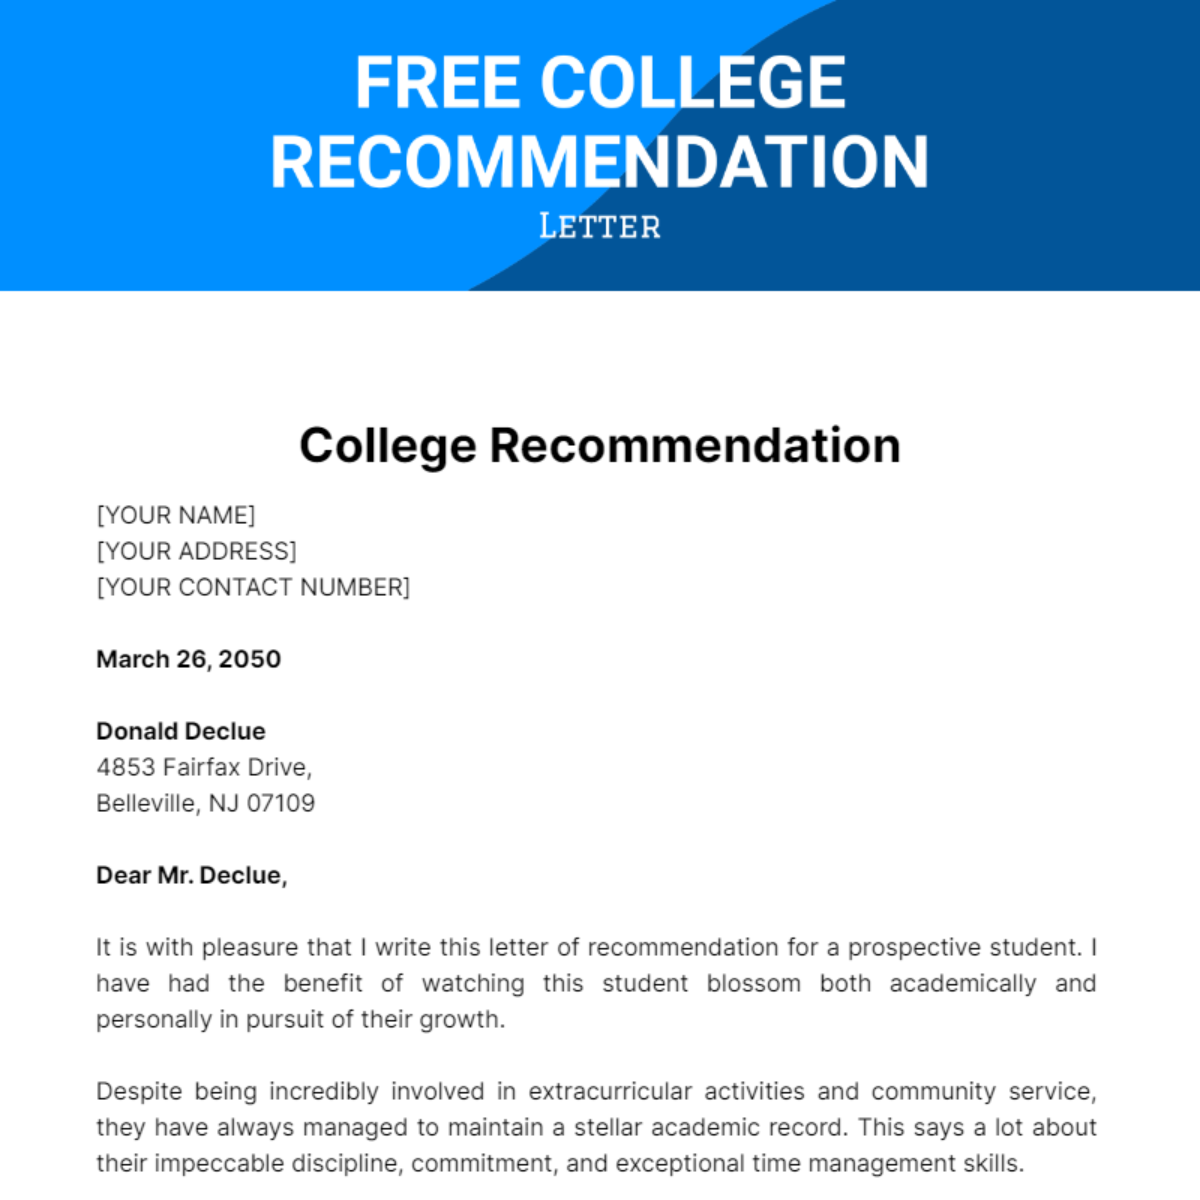 Free College Recommendation Letter template